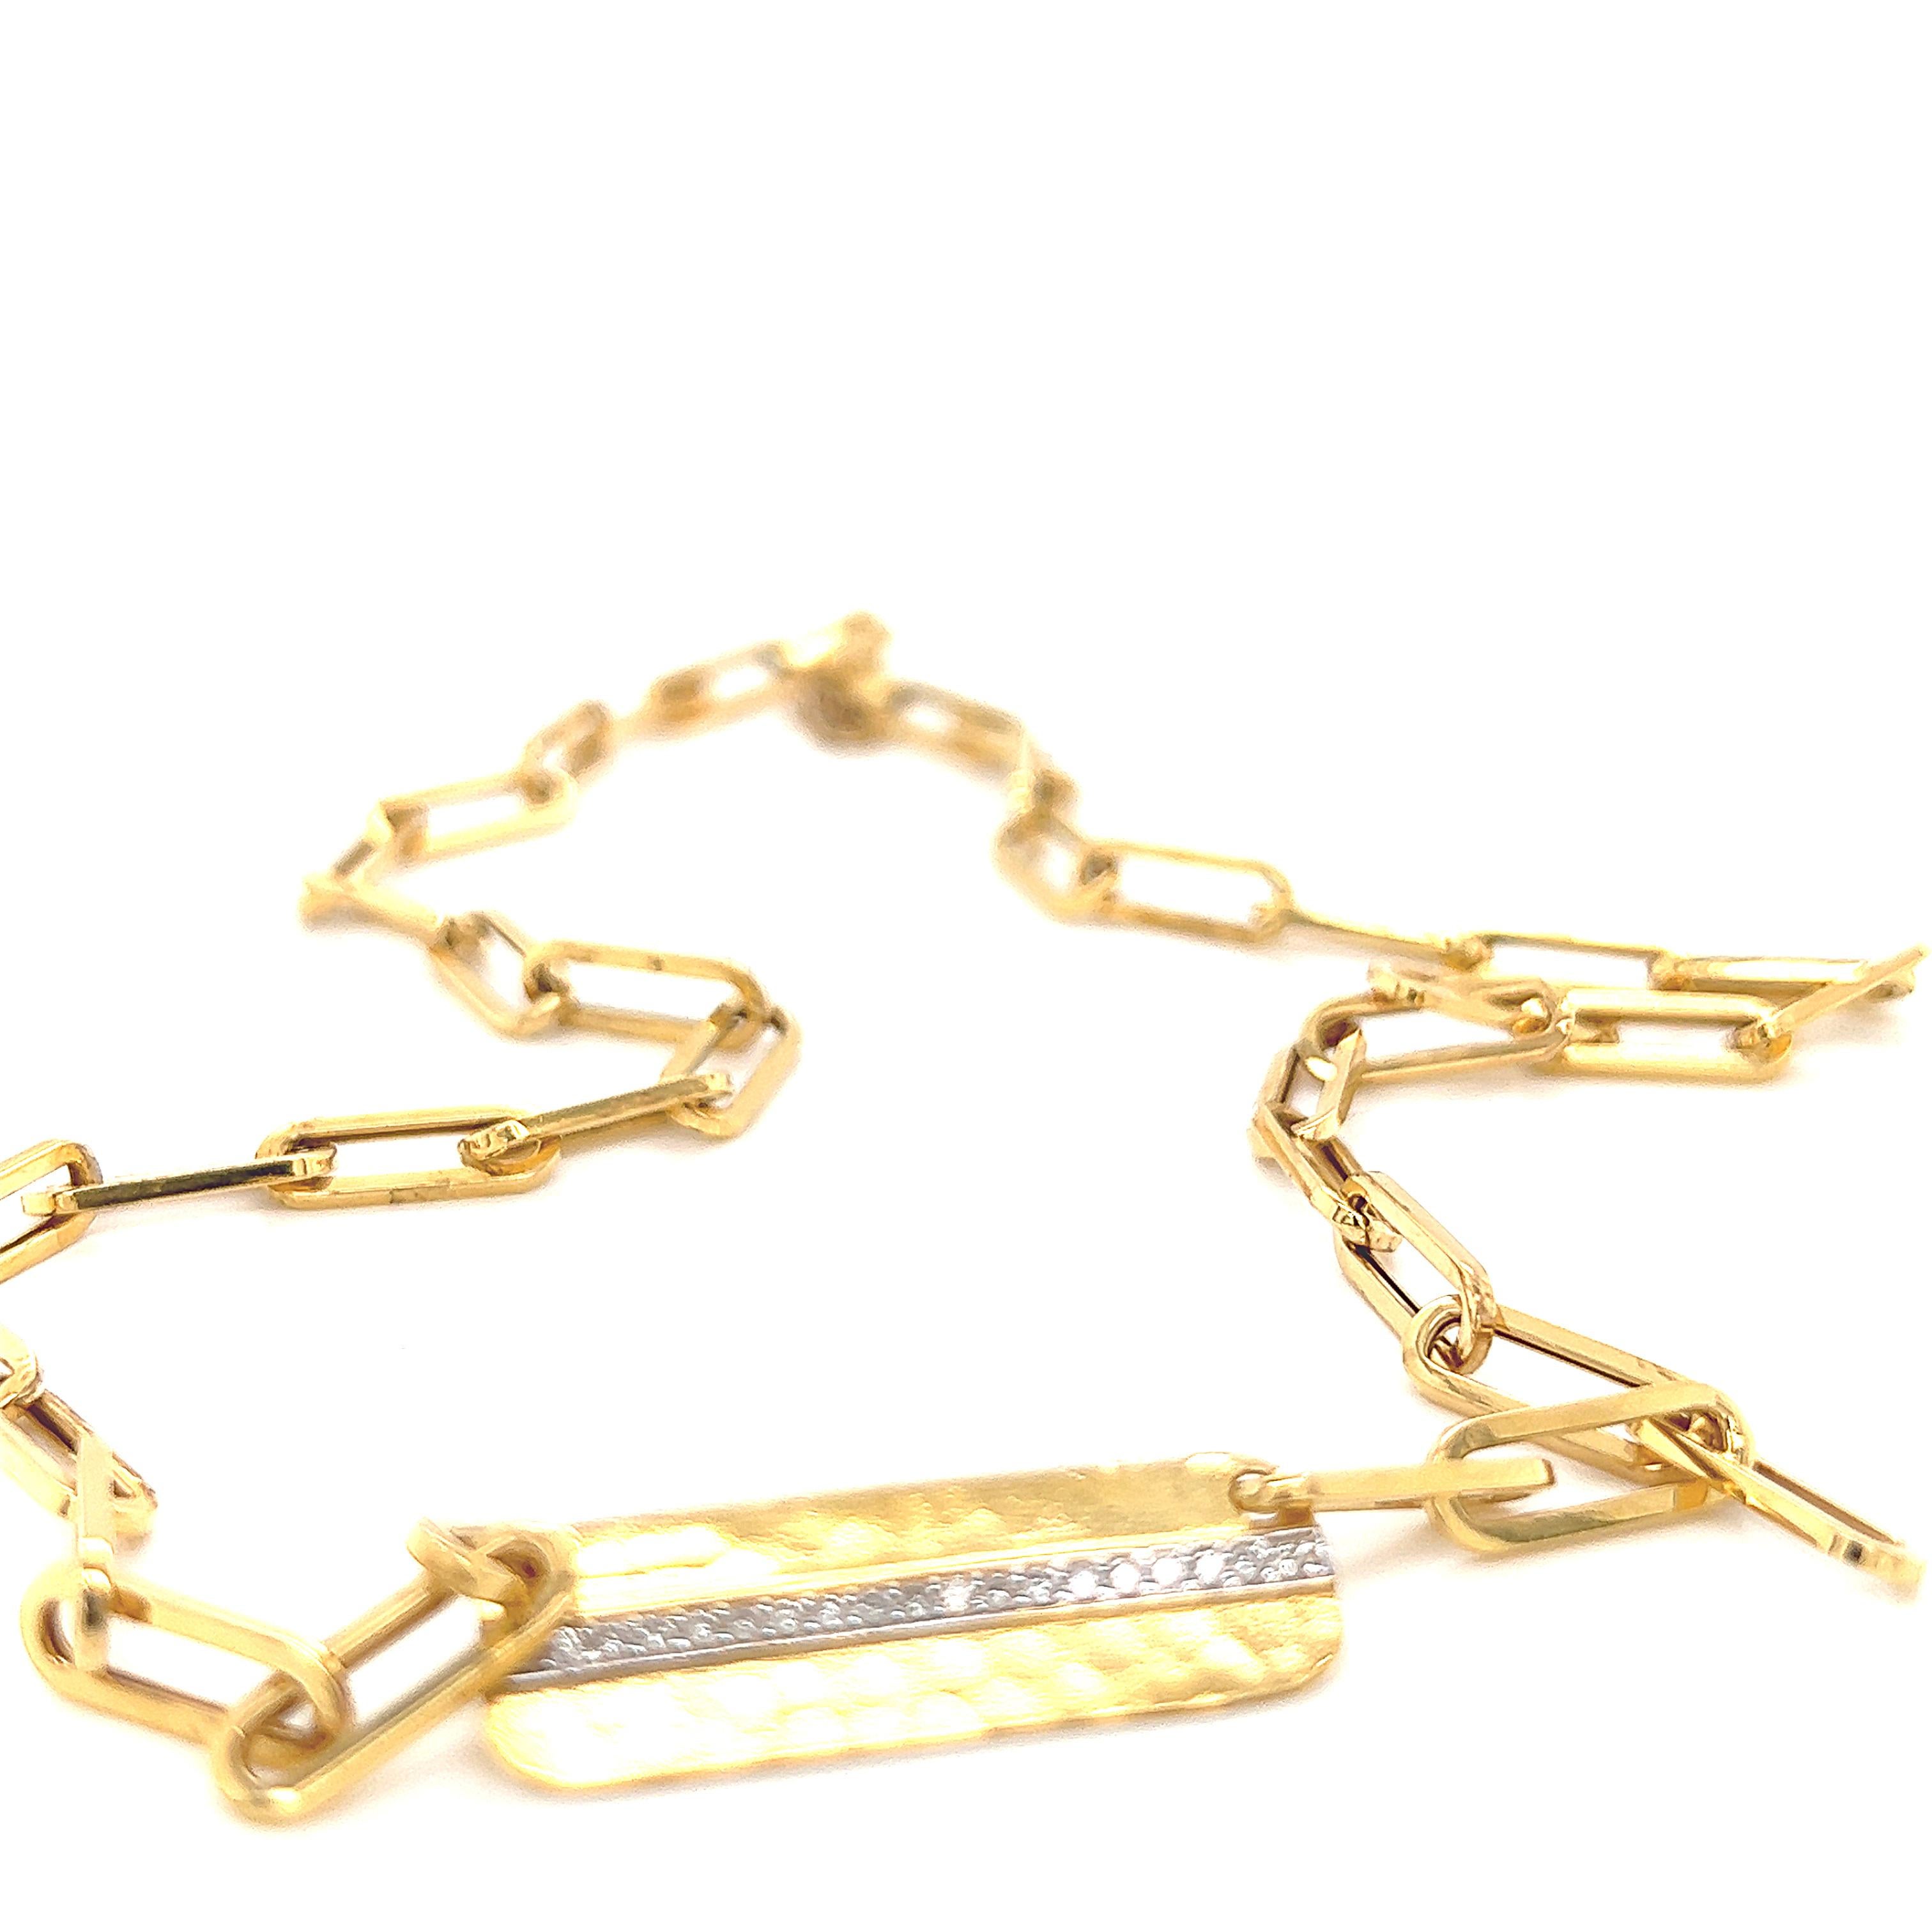 Craftted 14K Yellow Gold Open Link Dog Tag Necklace Neuf - En vente à Great Neck, NY